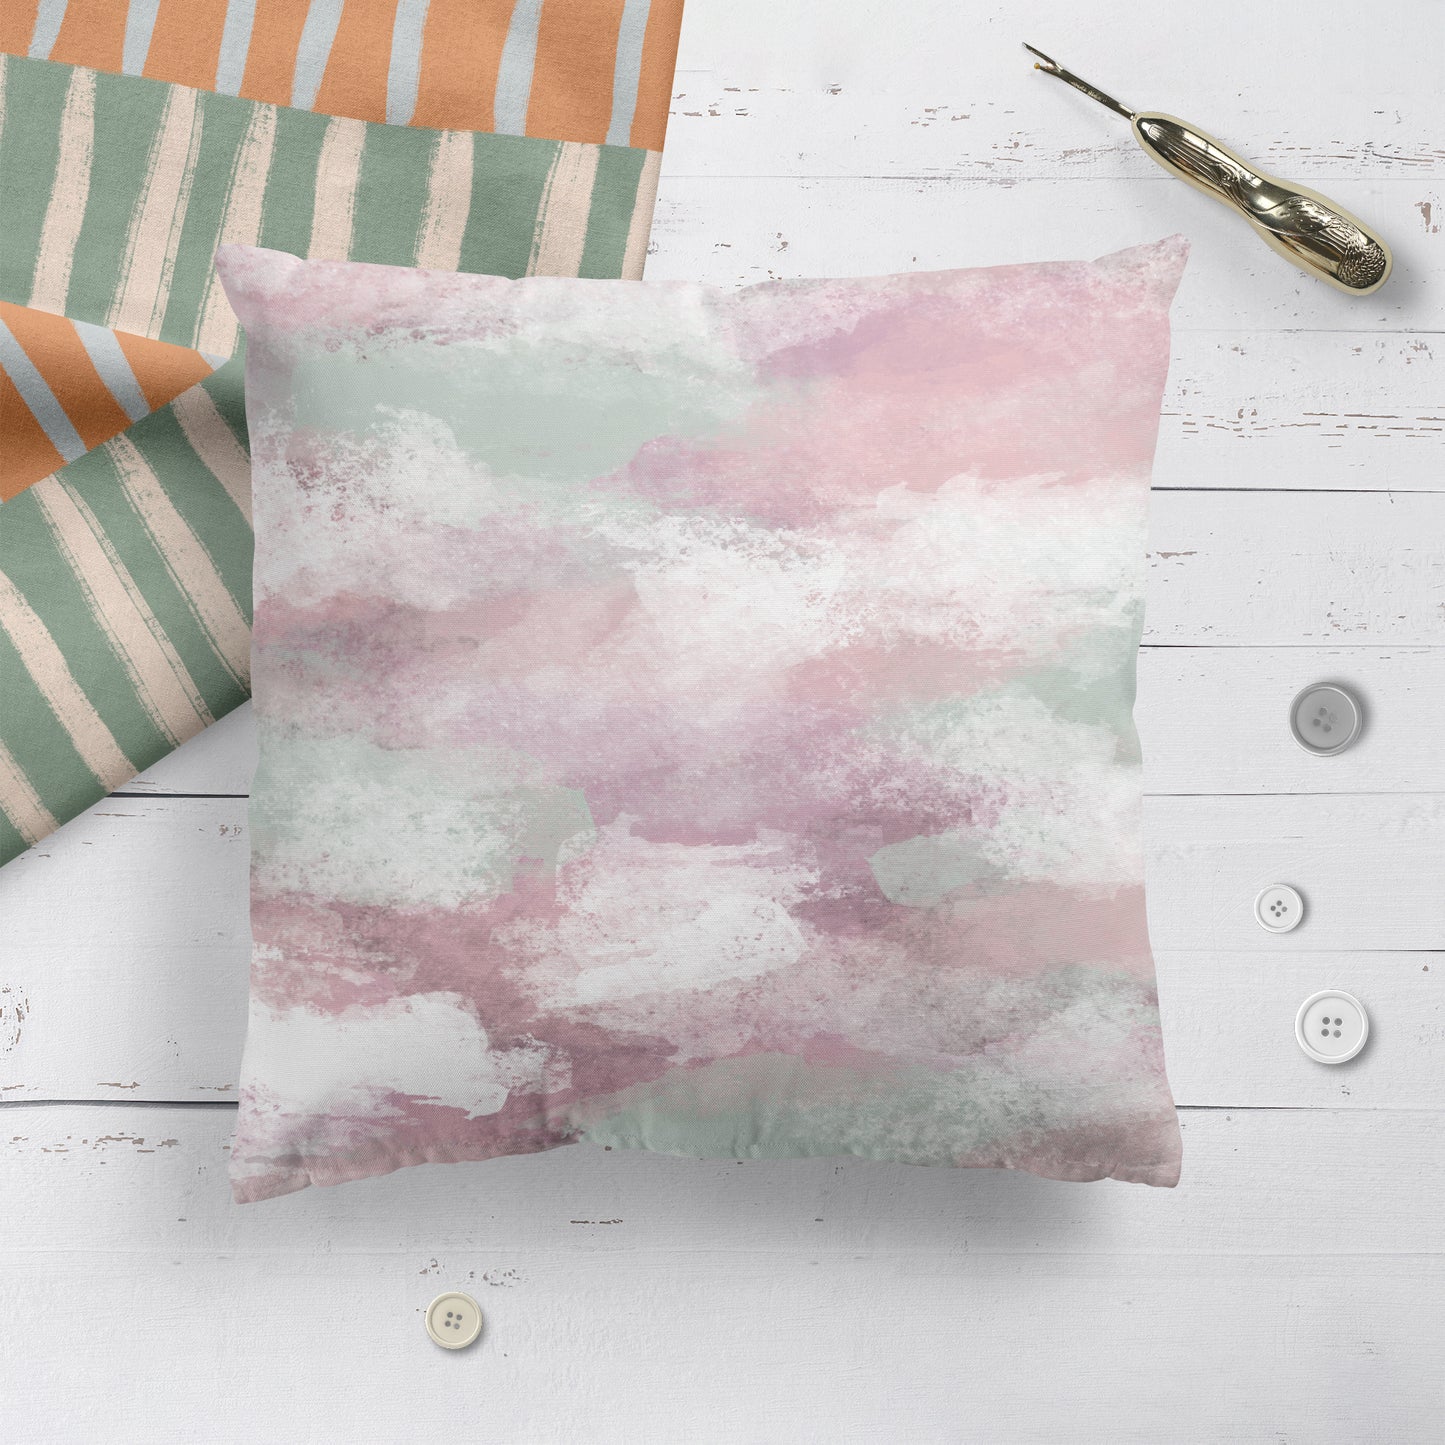 Bright Hand Painted Abstract Gradient Throw Pillow